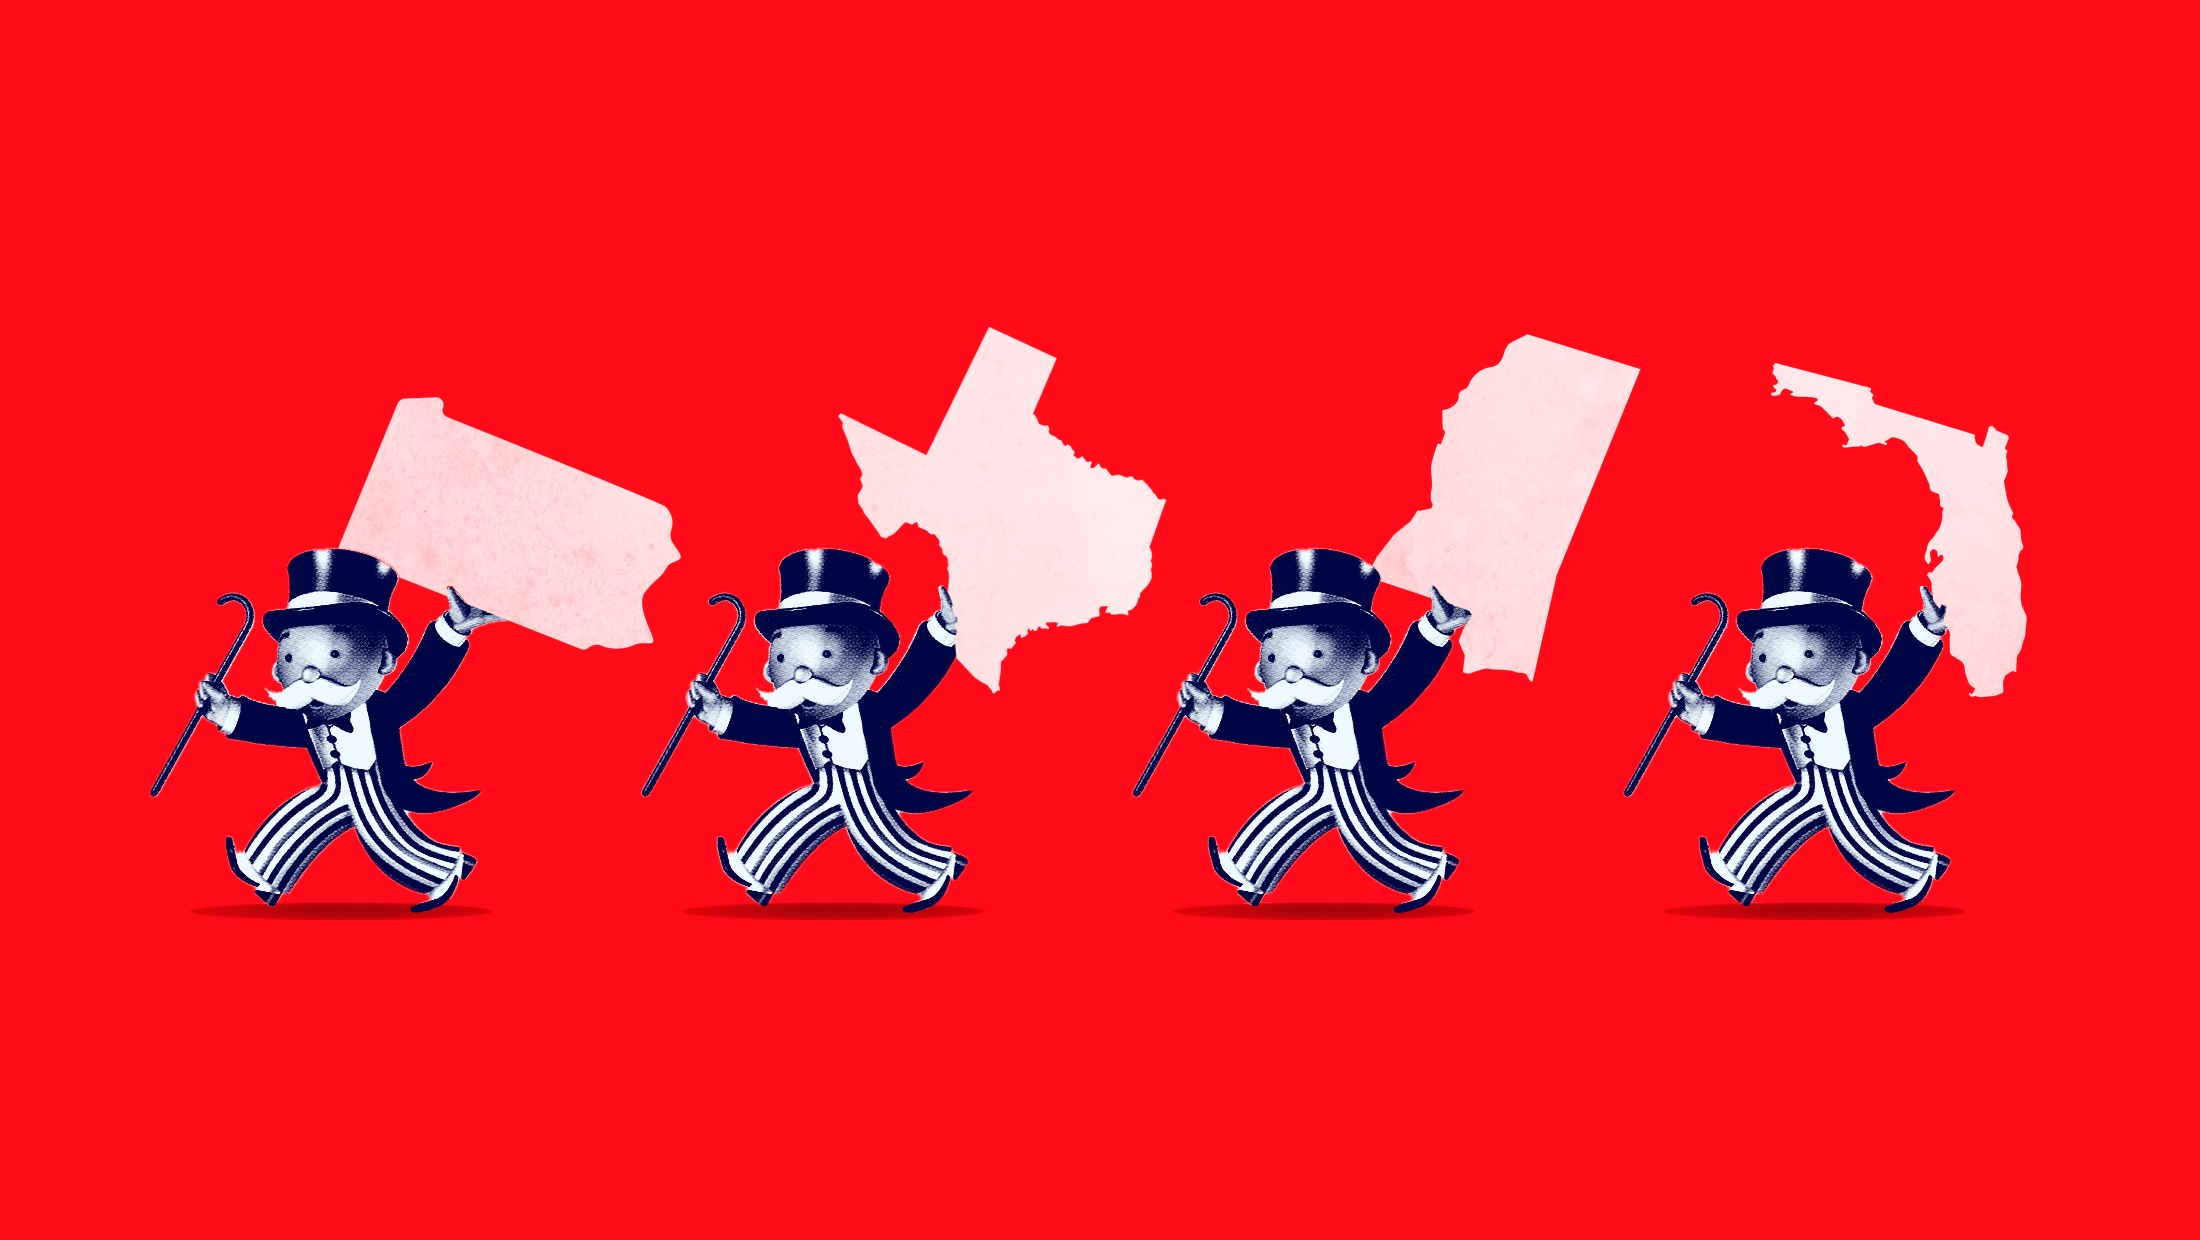 Red background with four Monopoly men carrying various state shapes, from the left: Pennsylvania, Texas, Mississippi and Florida.